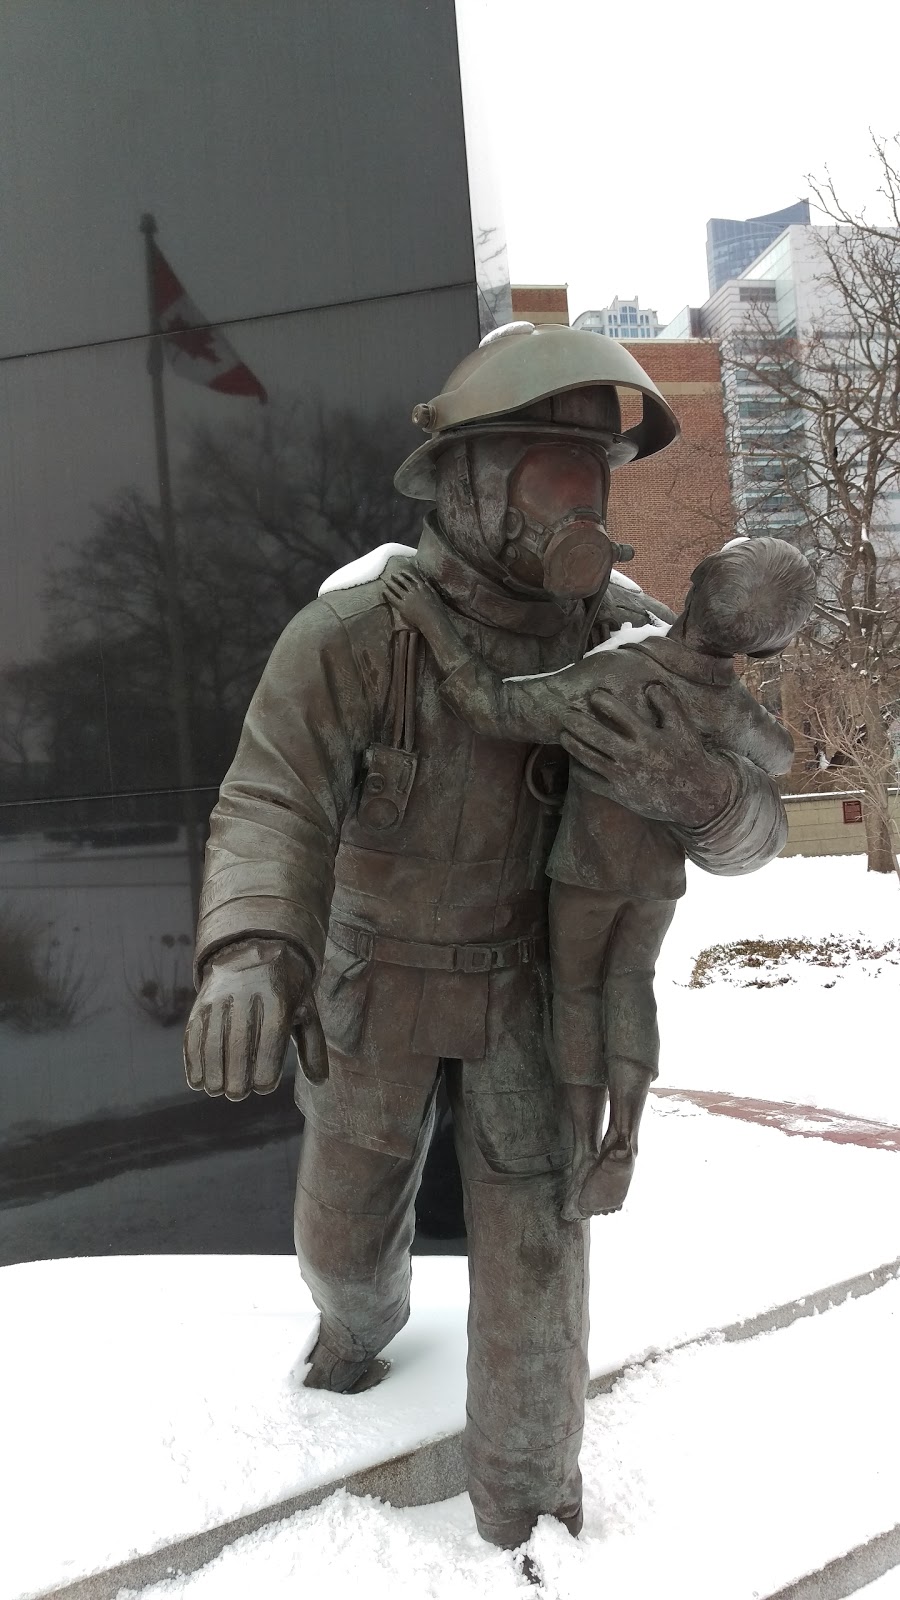 Ontario Fire Fighters Memorial | park | College St, Toronto, ON M5G 1L6, Canada